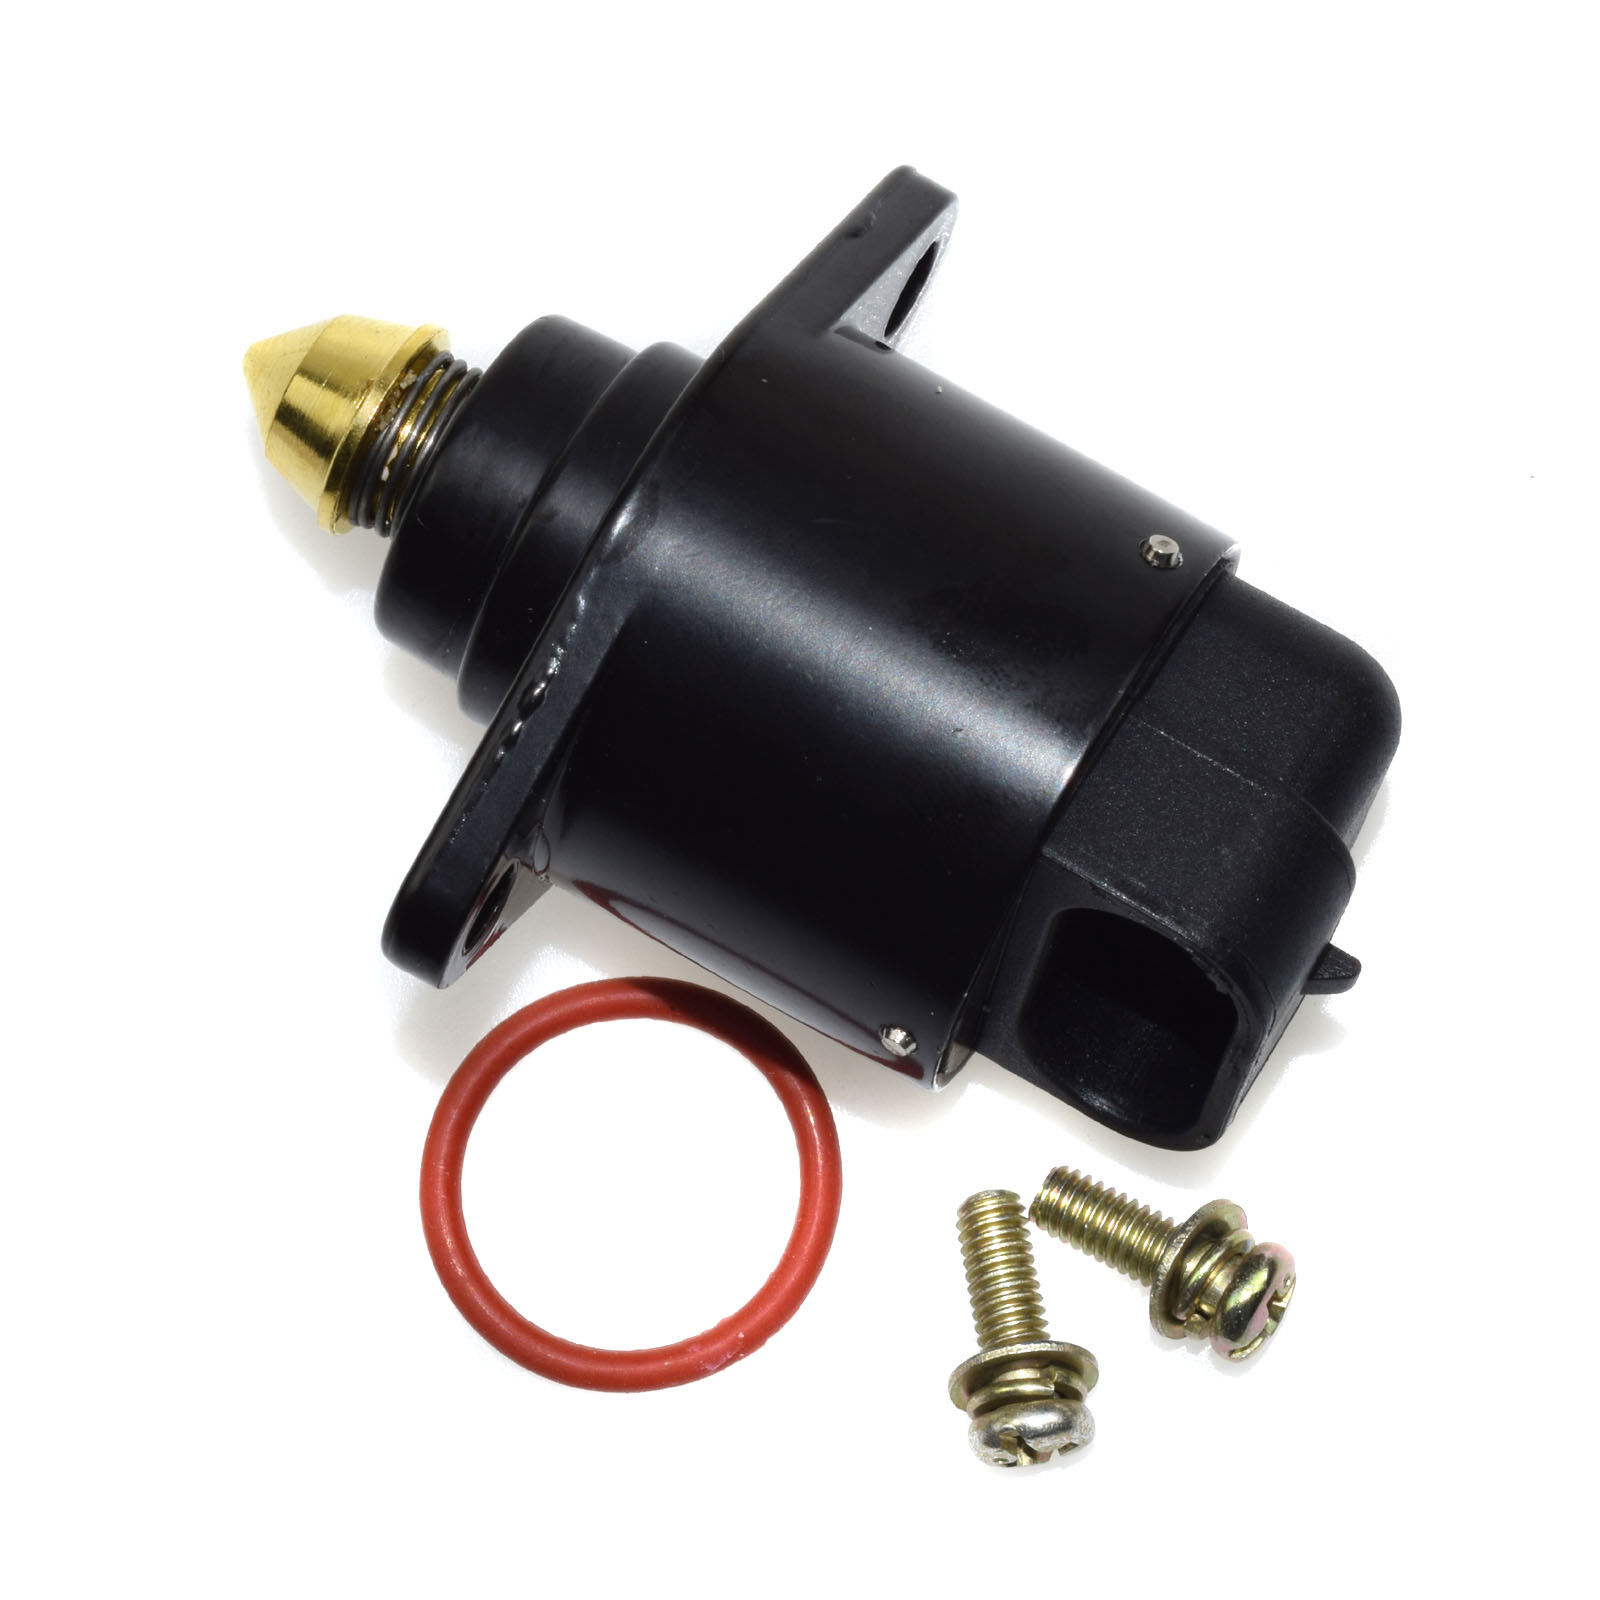 NEW IDLE AIR CONTROL VALVE FIT FOR OPEL ASTRA F CORSA VECTRA ZAFIRA